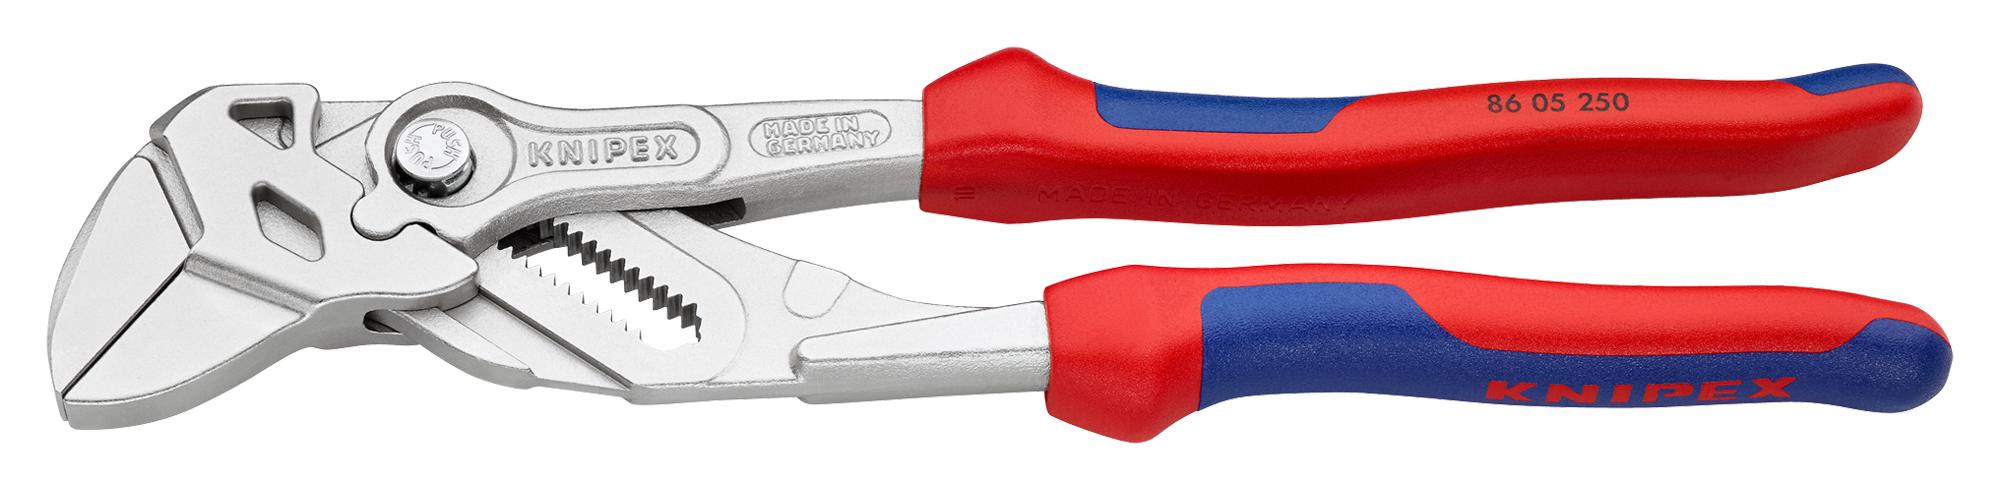 Knipex 86 05 250 Plier, Wrench, 250mm